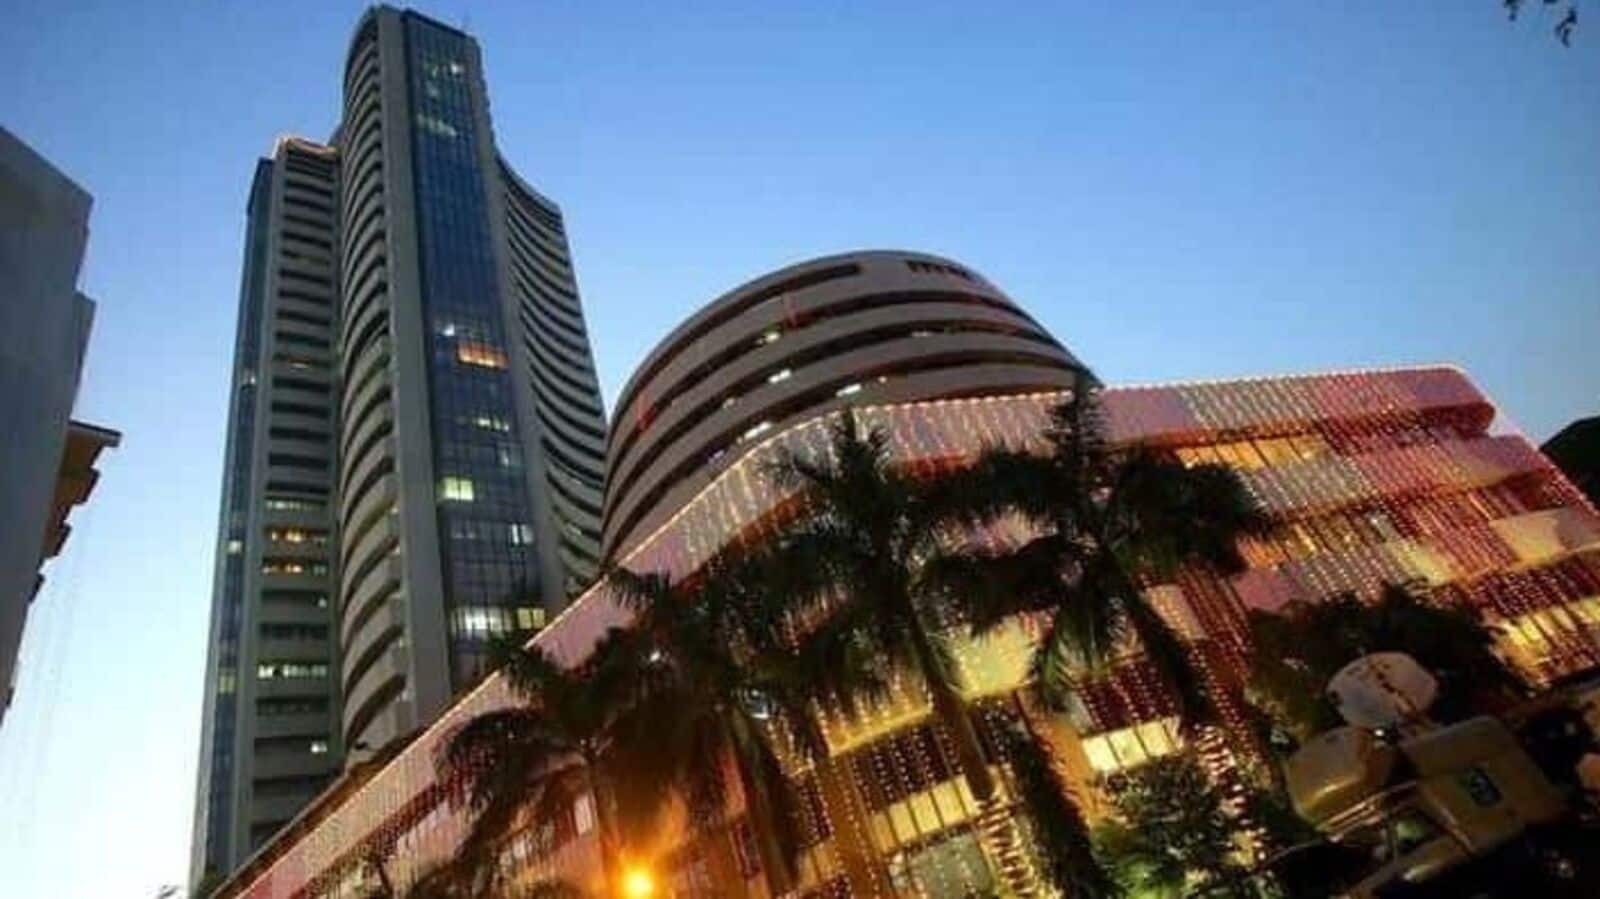 The BSE and NSE stock exchanges will conduct their one-hour Muhurat trading for Diwali on Monday, October 24, 2022. The BSE and NSE said that trading would start in different sectors at 6:15 p.m. and would end an hour later at 7:15 p.m. The block deal session of the share market will take place from 5:45 p.m. to 6 p.m., while the pre-open session will begin at 6:00 and last until 6:08 p.m. Samvat 2079, the new Hindu year, which begins on Diwali, would be marked by the muhurat trading.